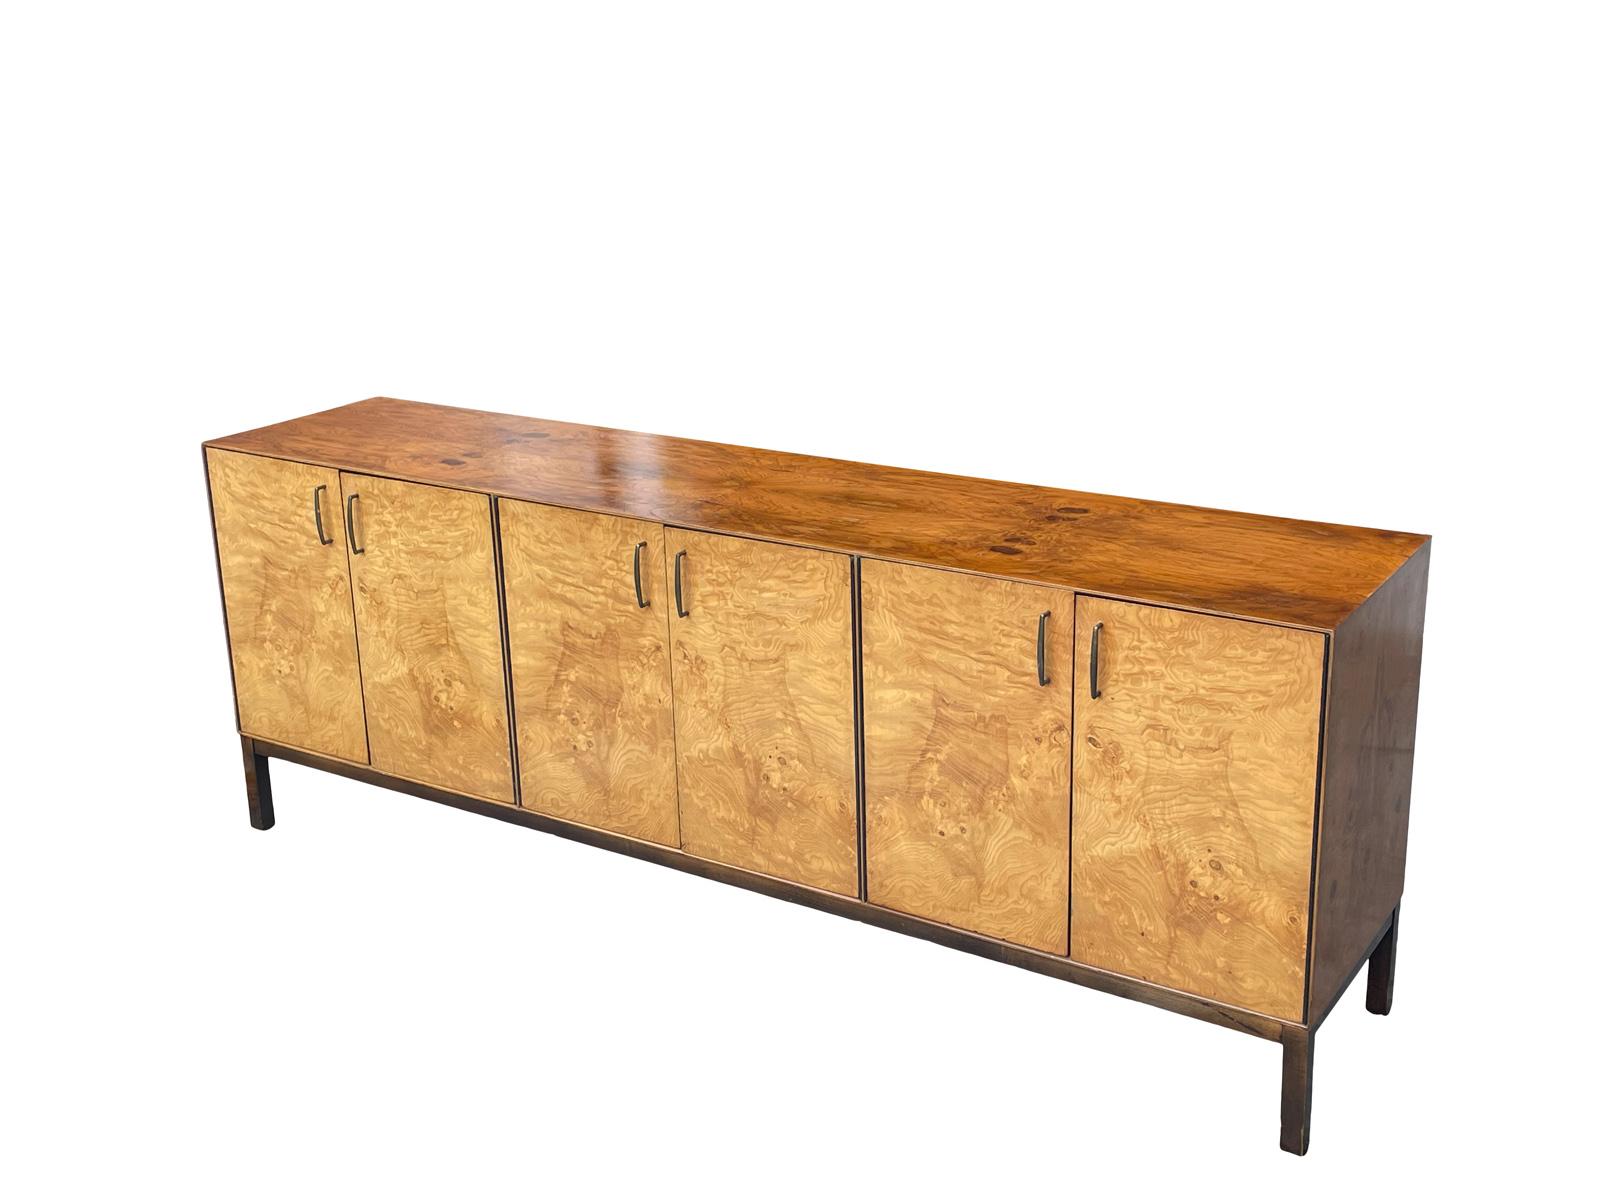 Rare burl credenza buffet cabinet by Directional for Milo Baughman very high quality comes with original customized marble top from the manufacturer 